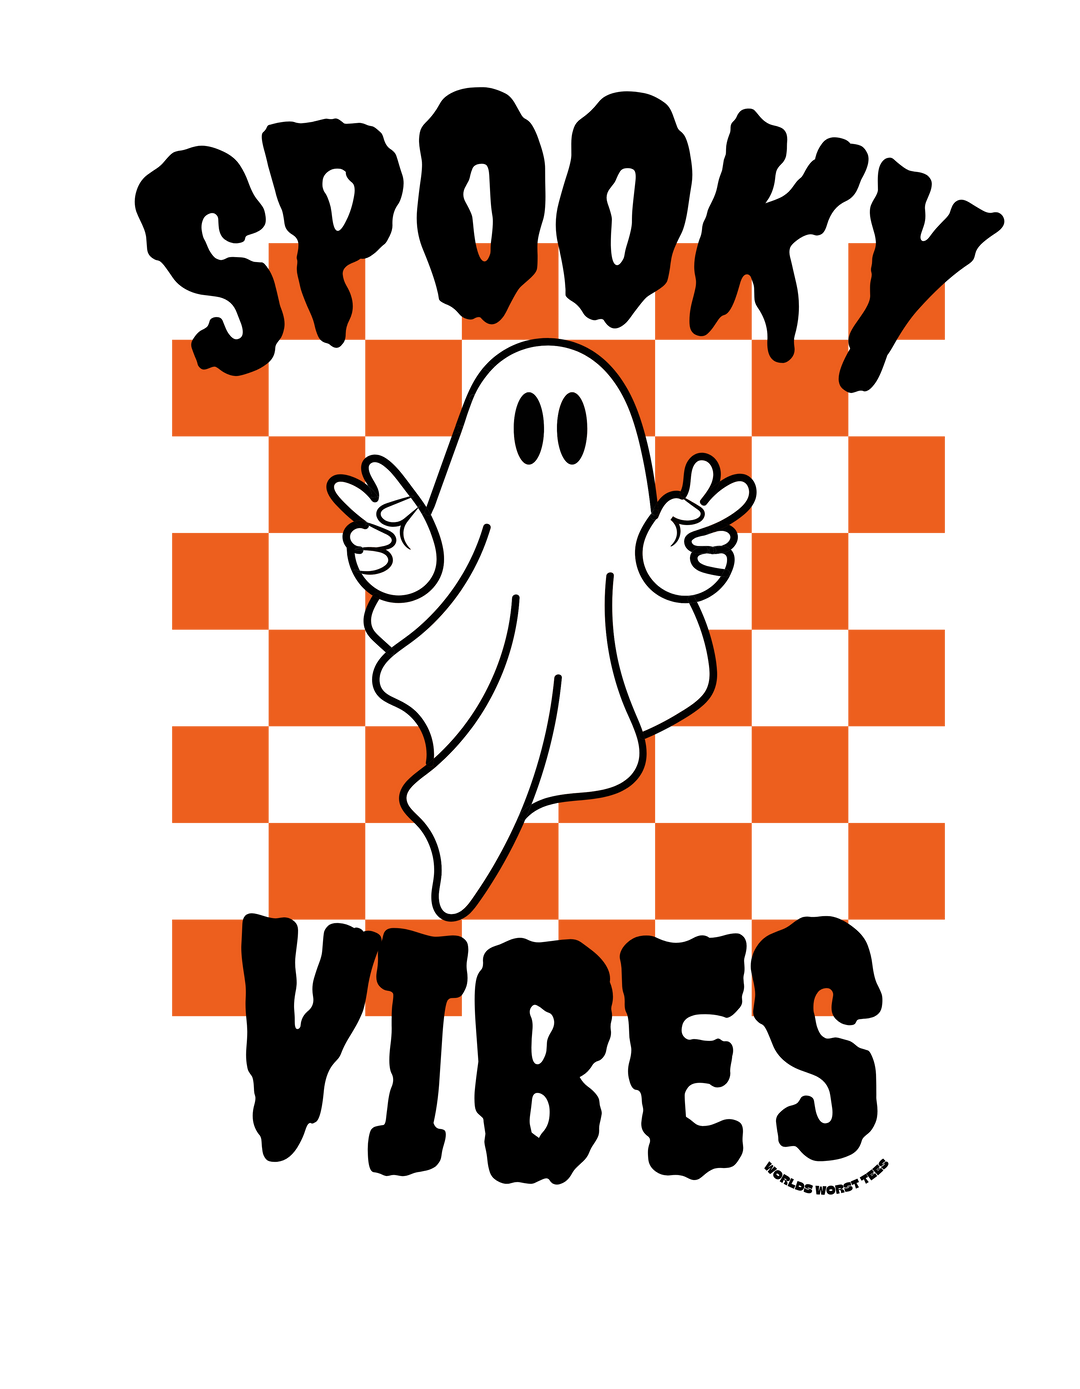 Spooky Vibes Toddler Long Sleeve Tee featuring a cartoon ghost illustration on a checkered background. 100% combed ringspun cotton, topstitched ribbed collar, and EasyTear™ label for durability and comfort.